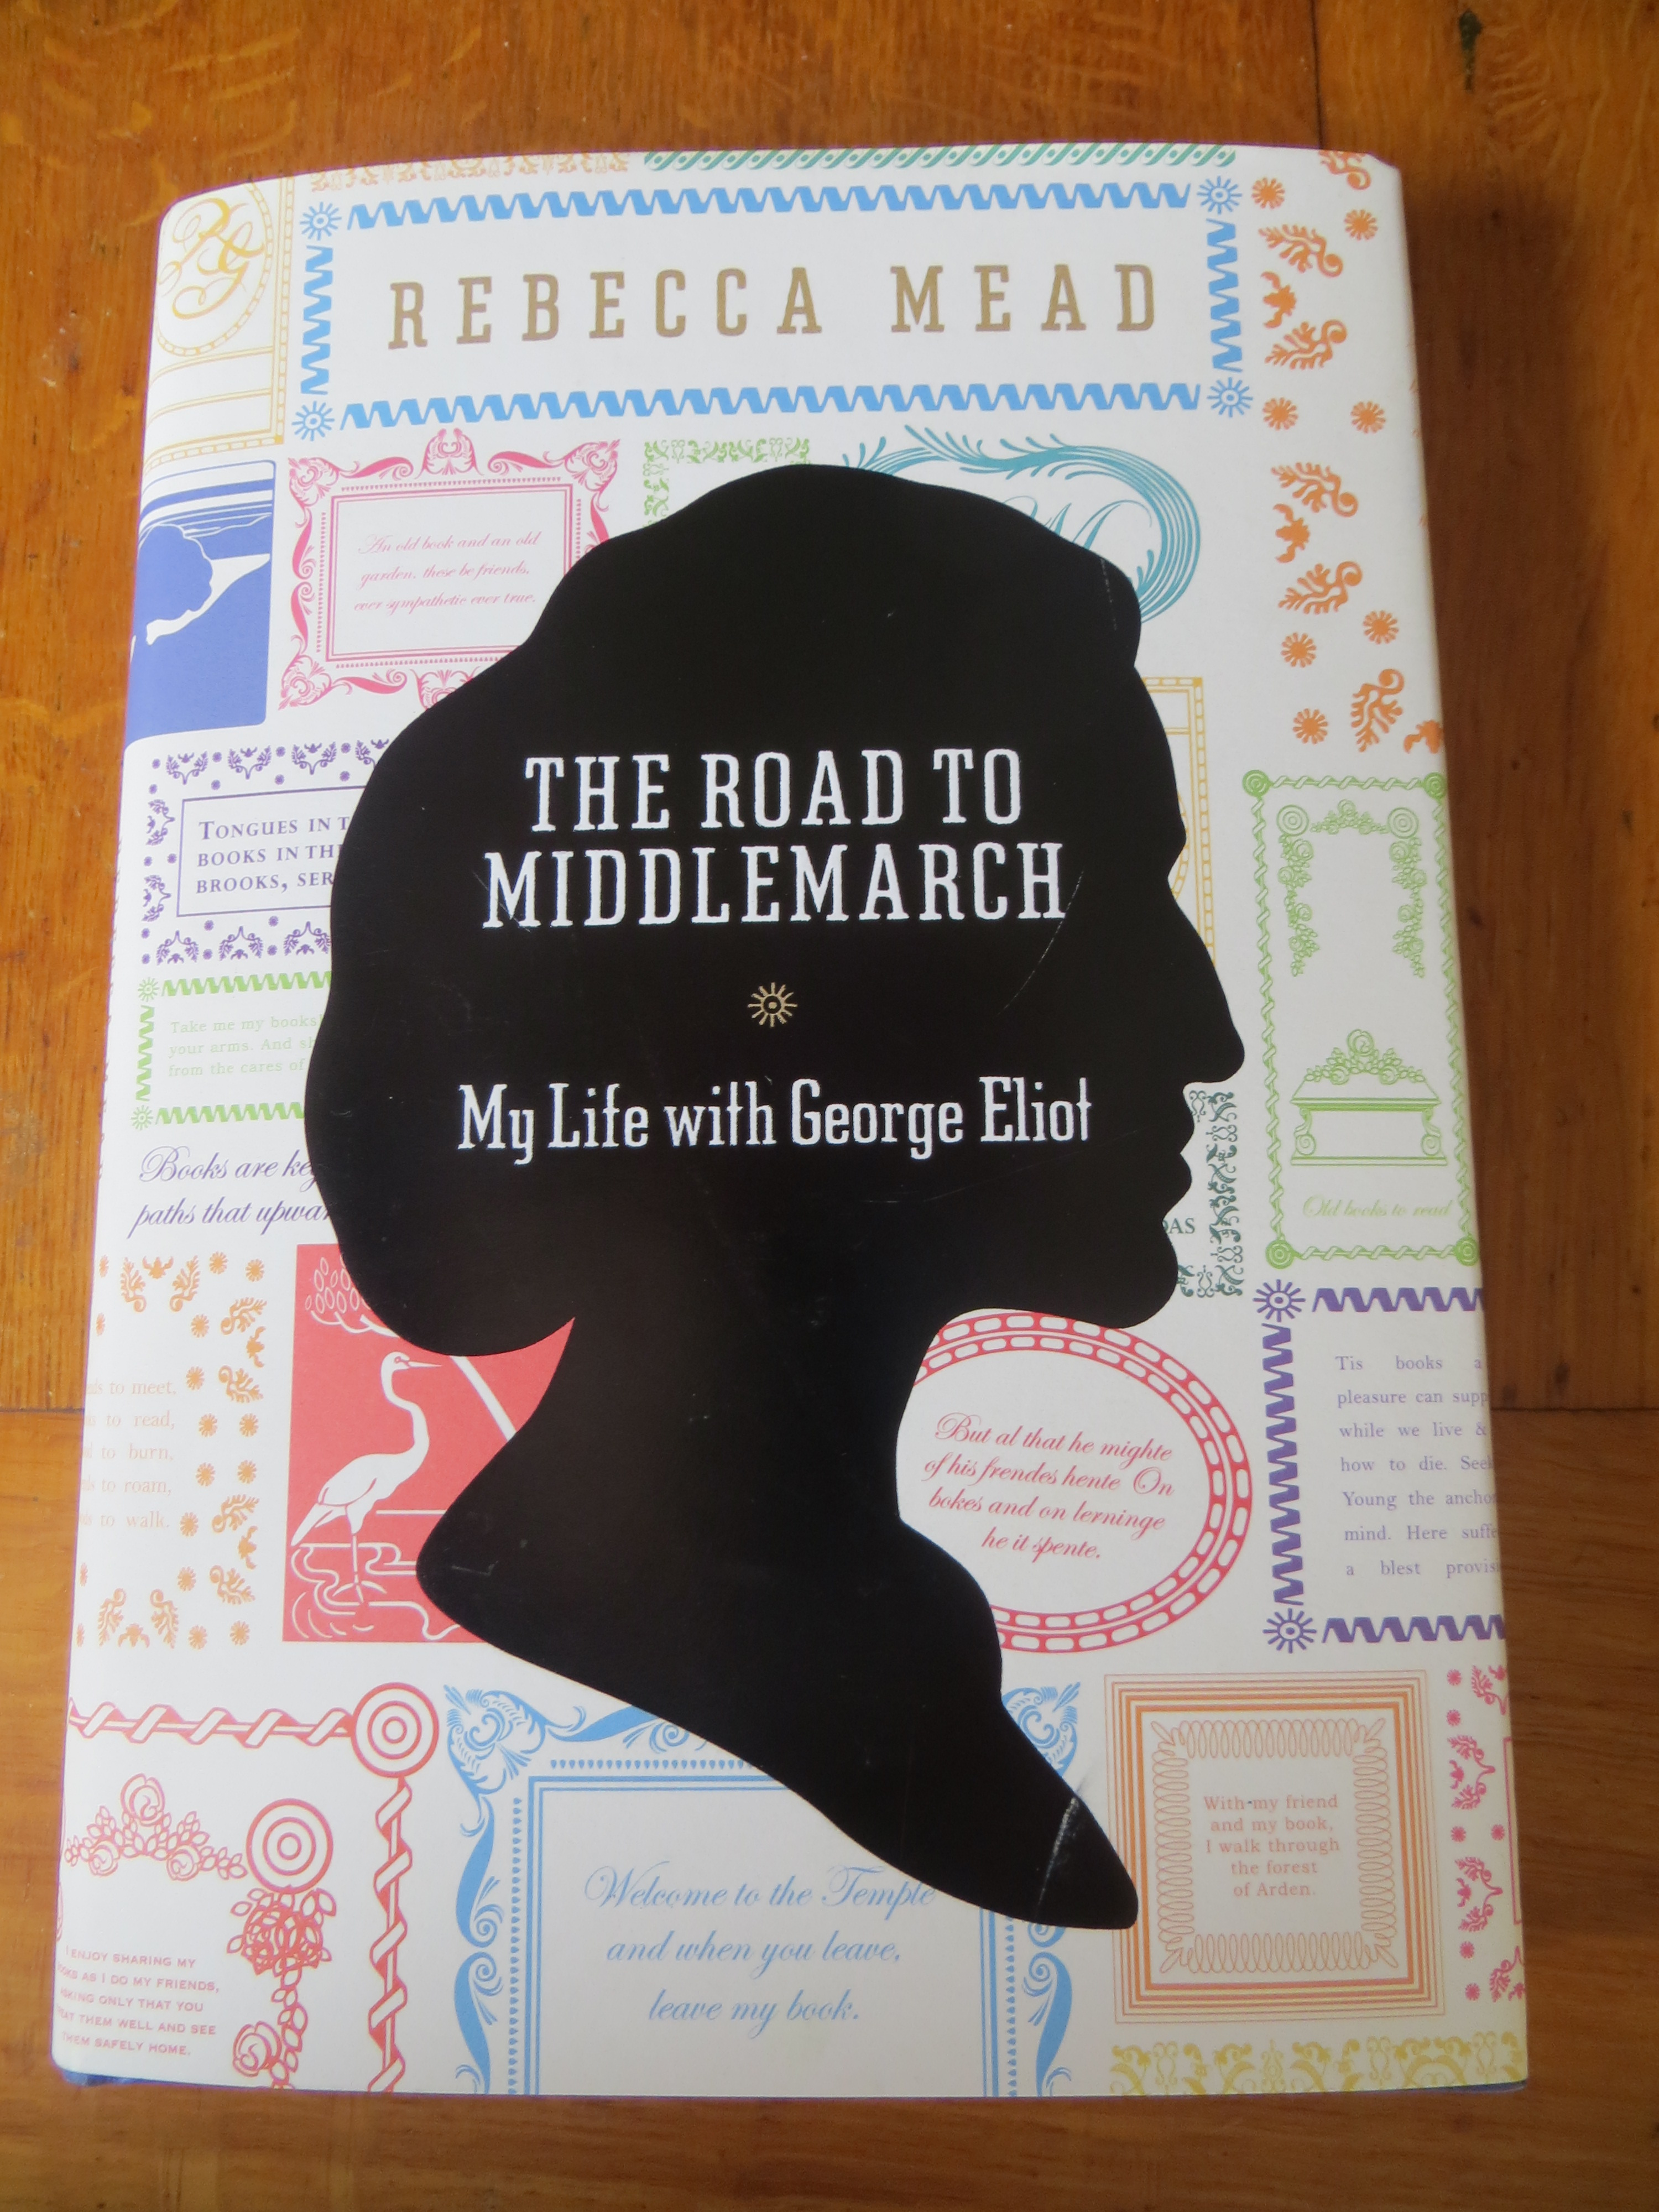 The Road to Middlemarch by Rebecca Mead